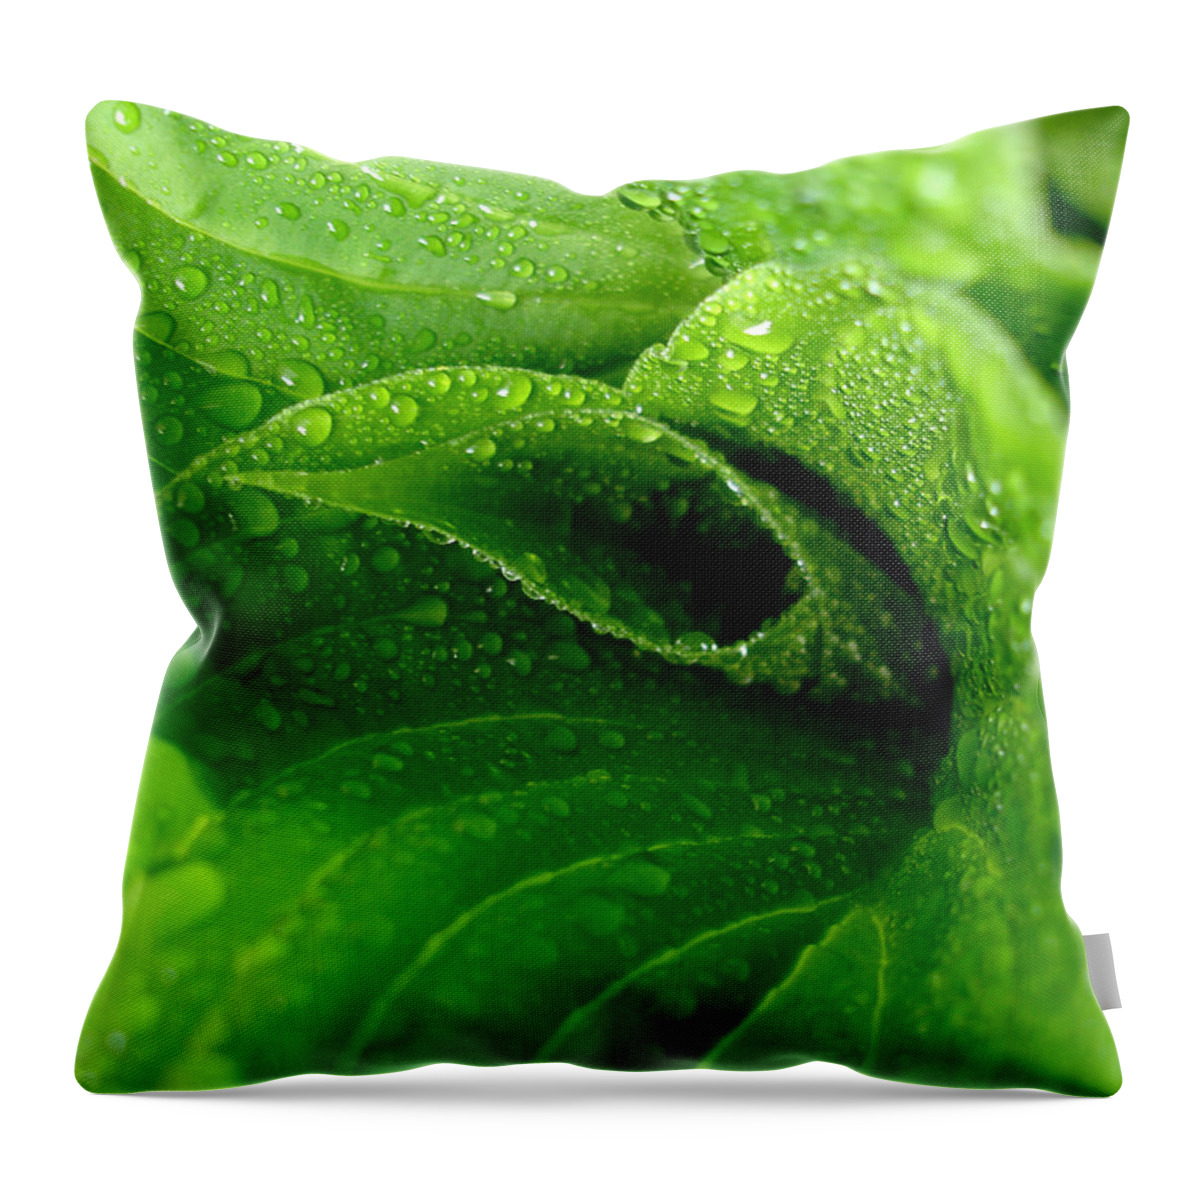 Dew Drops Throw Pillow featuring the photograph Dew Drops by Lisa Phillips